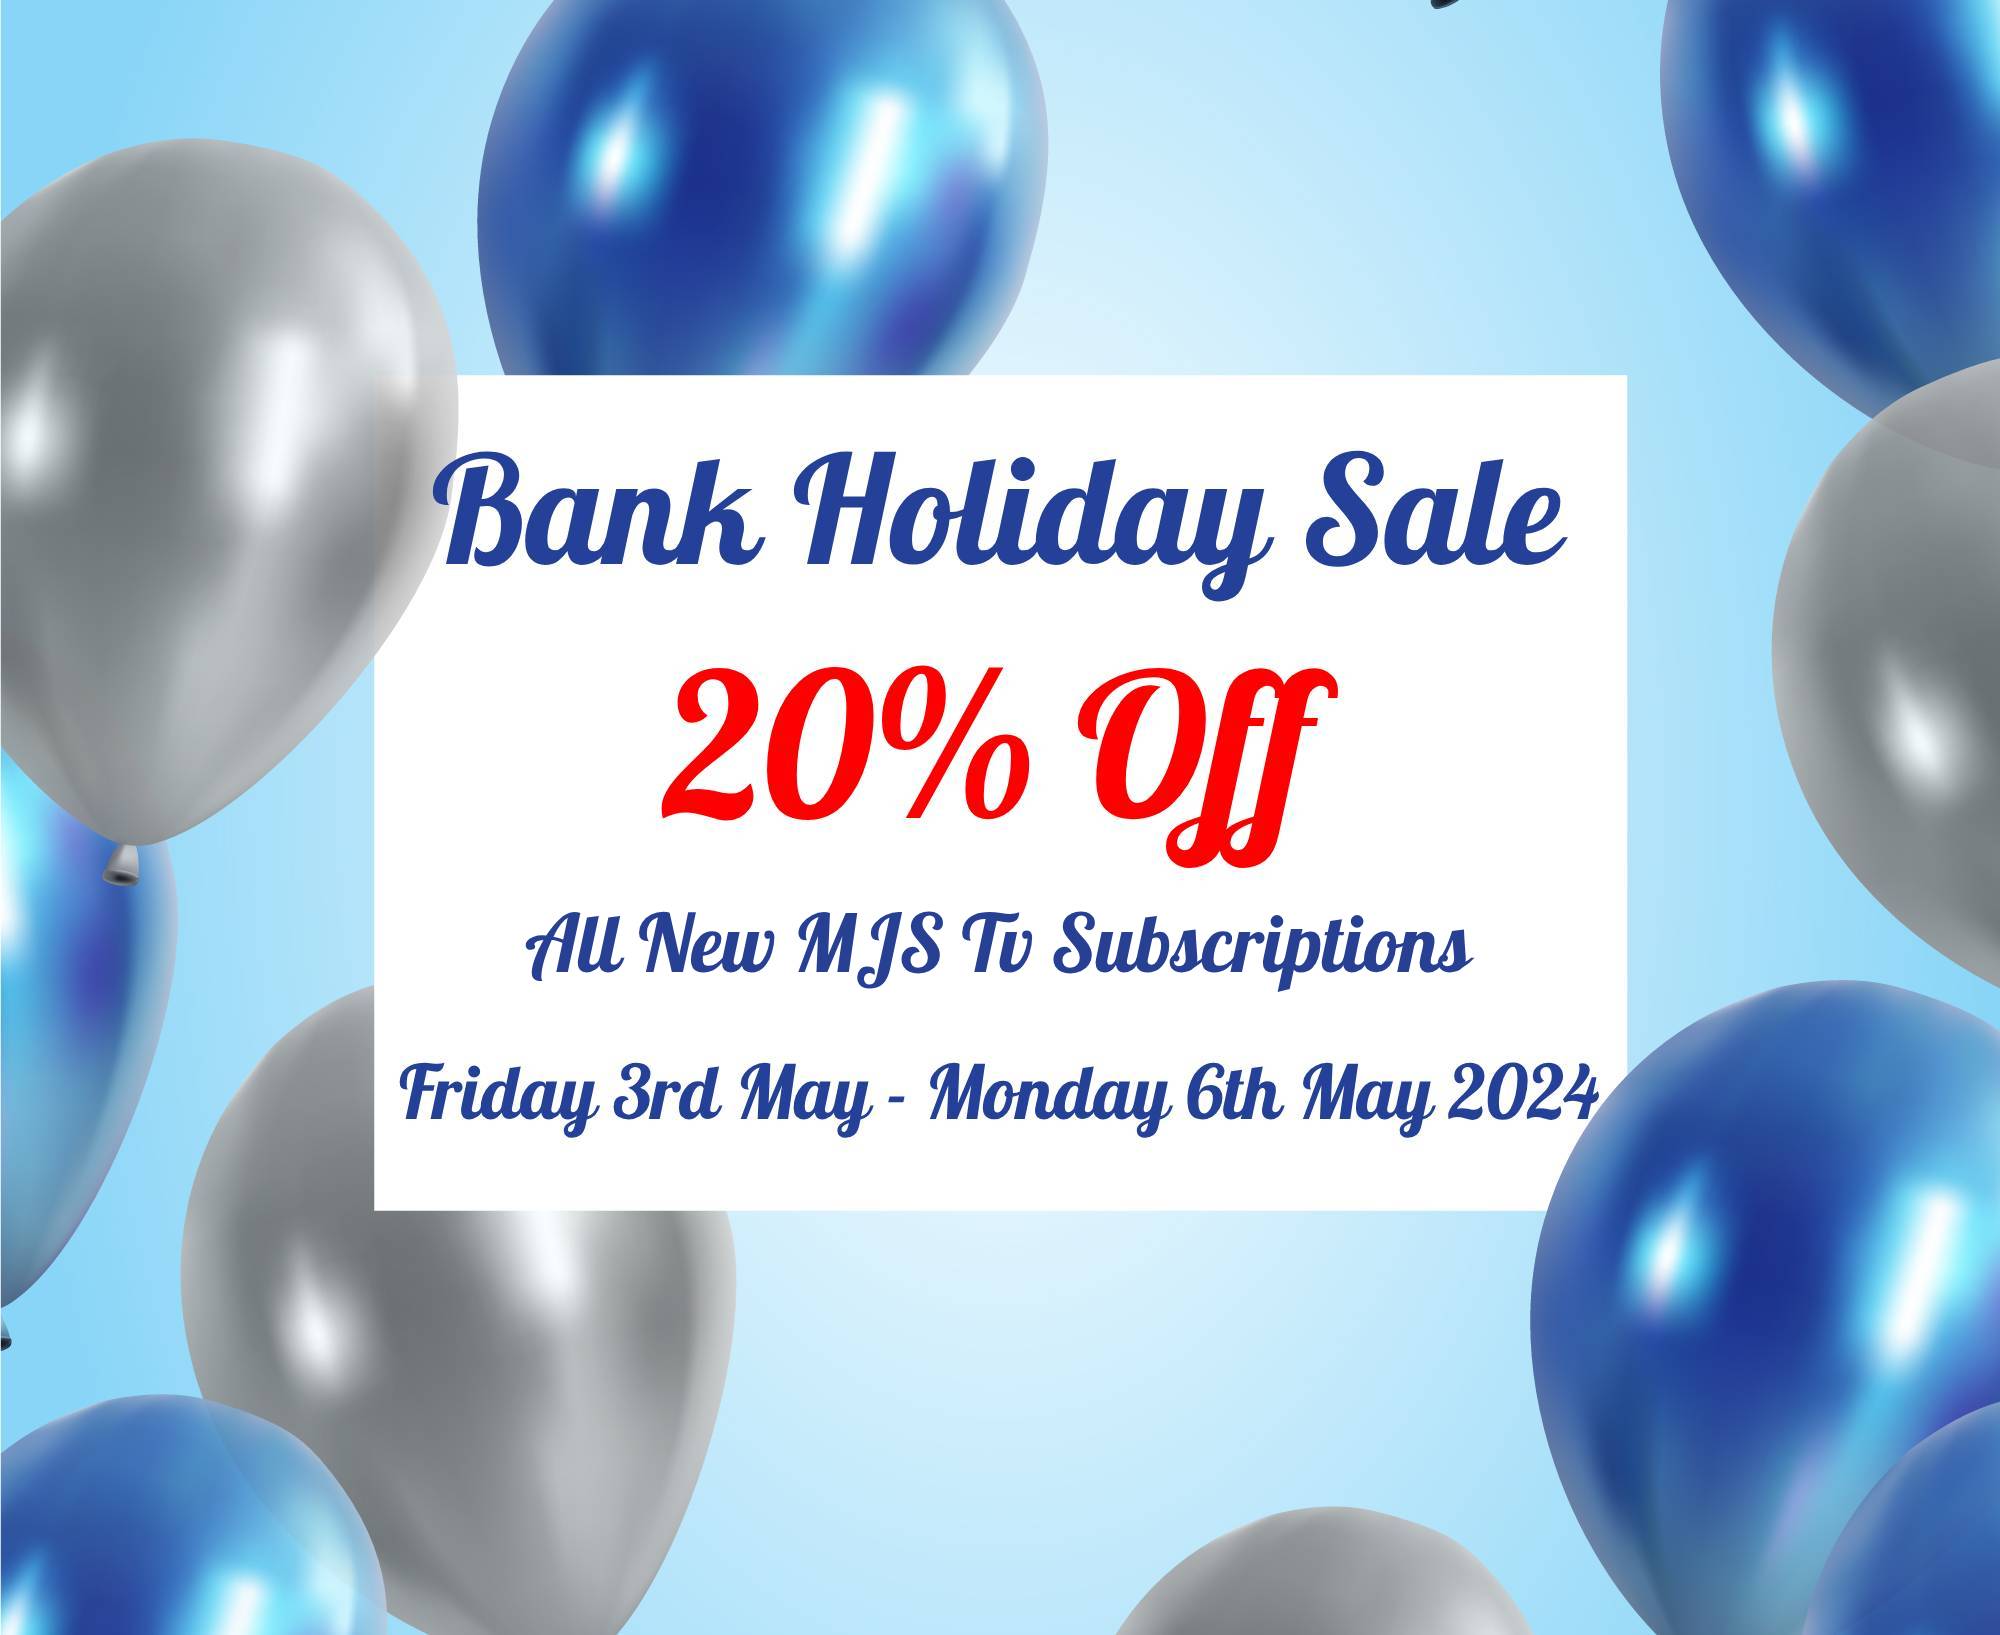 Bank Holiday Sale Has Started